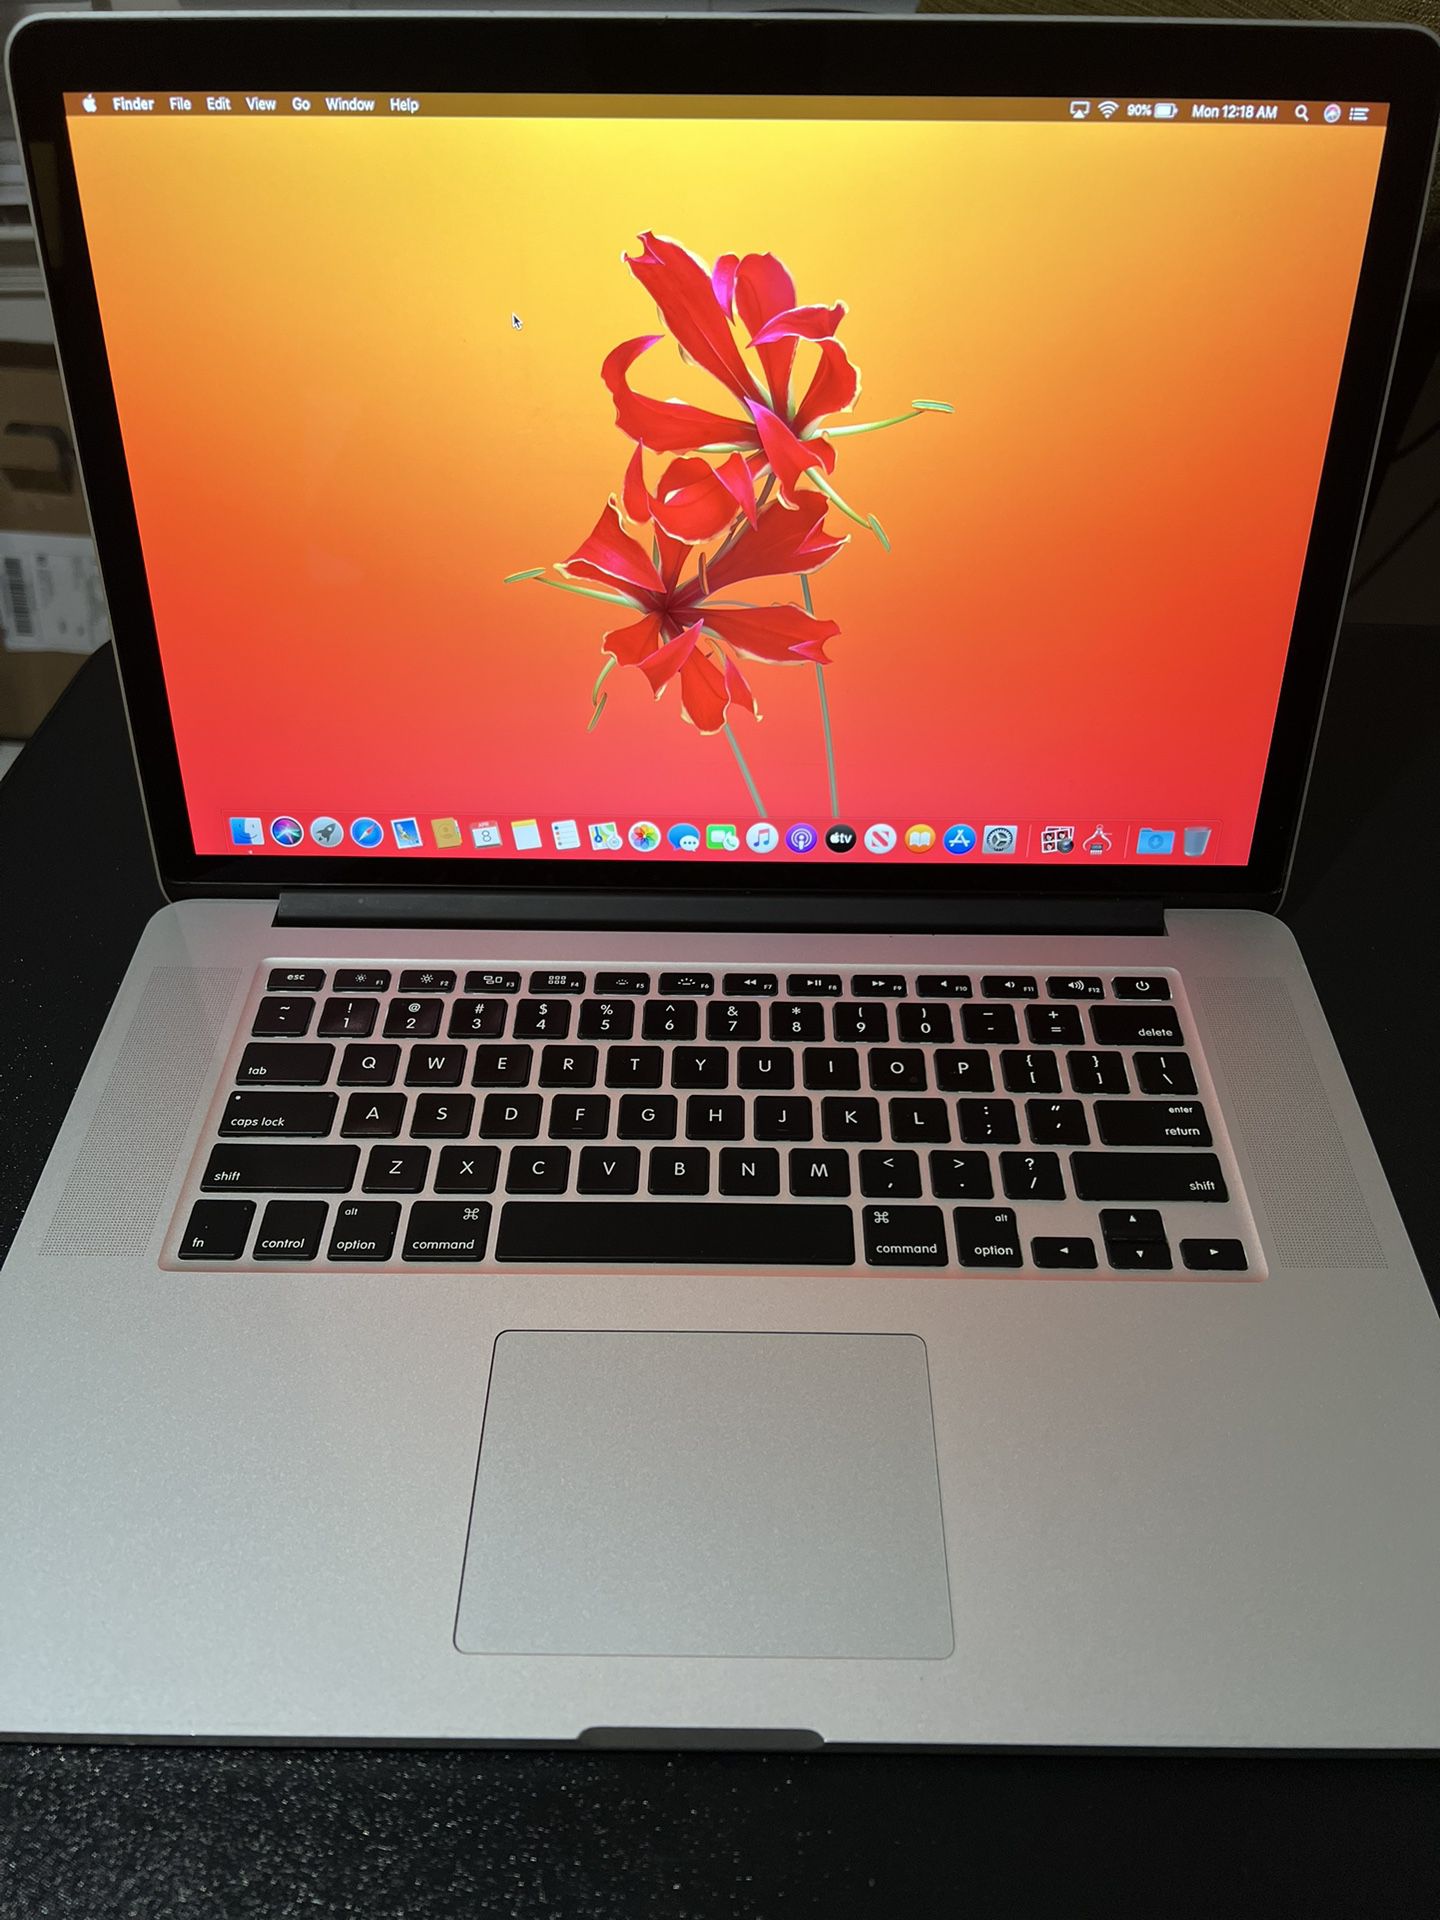 Macbook Pro 15 Inch Core I7 2.40ghz 8Gb 256 SSD 2013 Excellent For Work Or School